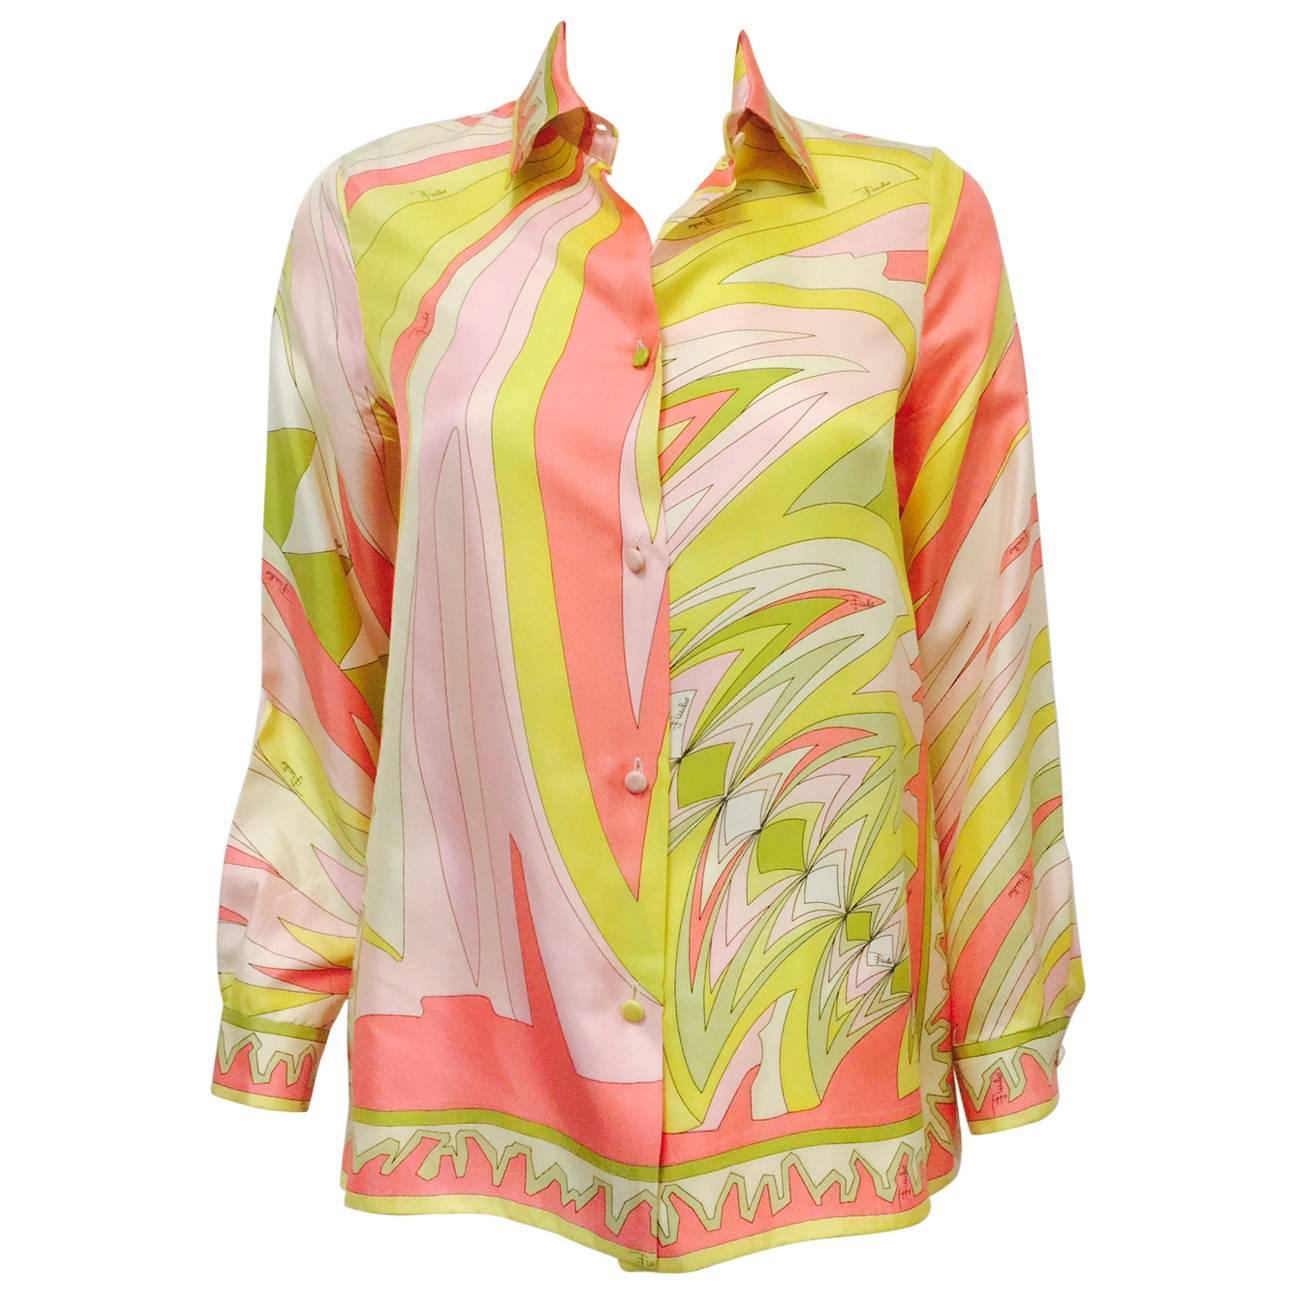 Exquisite Emilio Pucci Abstract Print Silk Blouse  